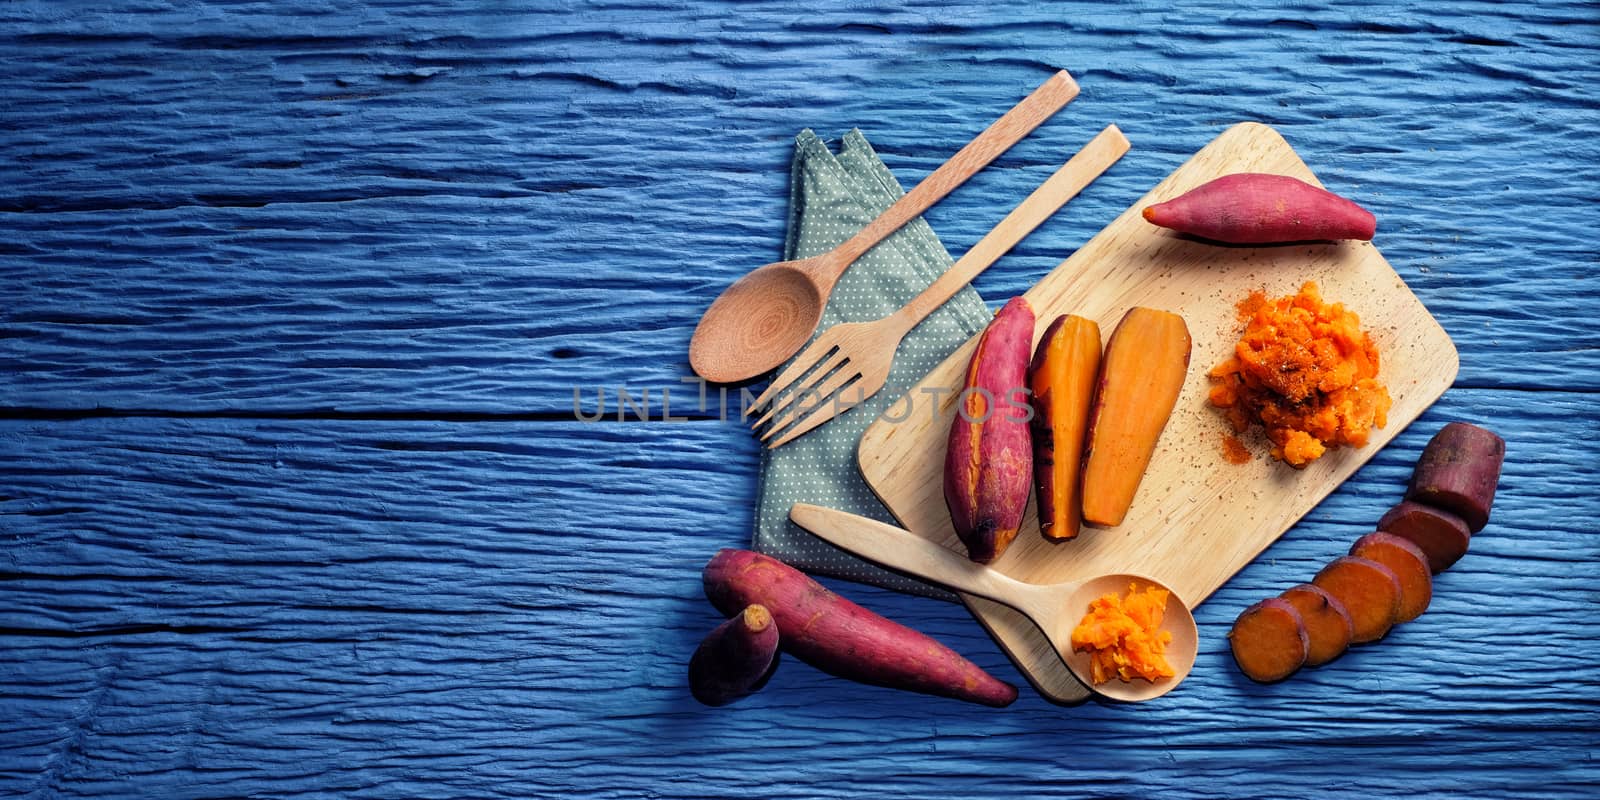 Sweet Potato on wooden cutting board and blank space for text on the left side with blue wood background